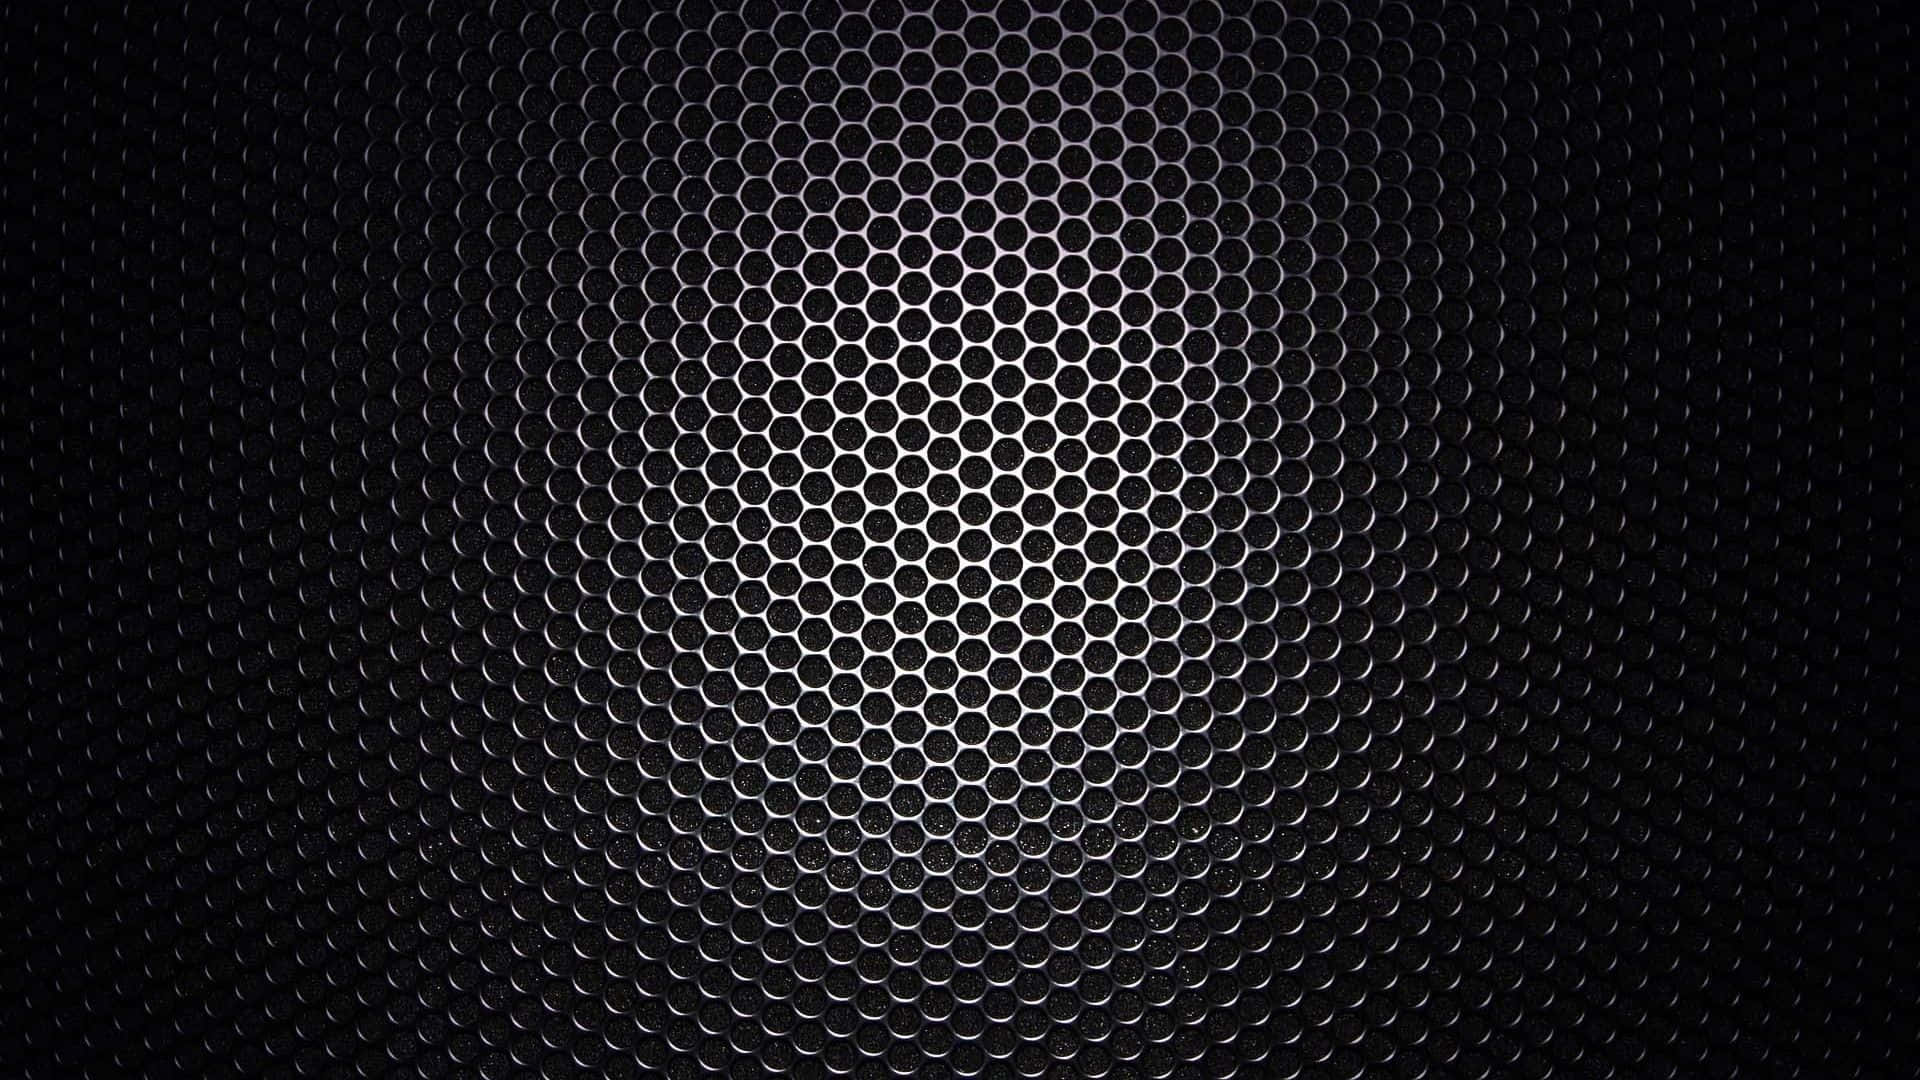 A Black Metal Background With A Pattern Of Holes